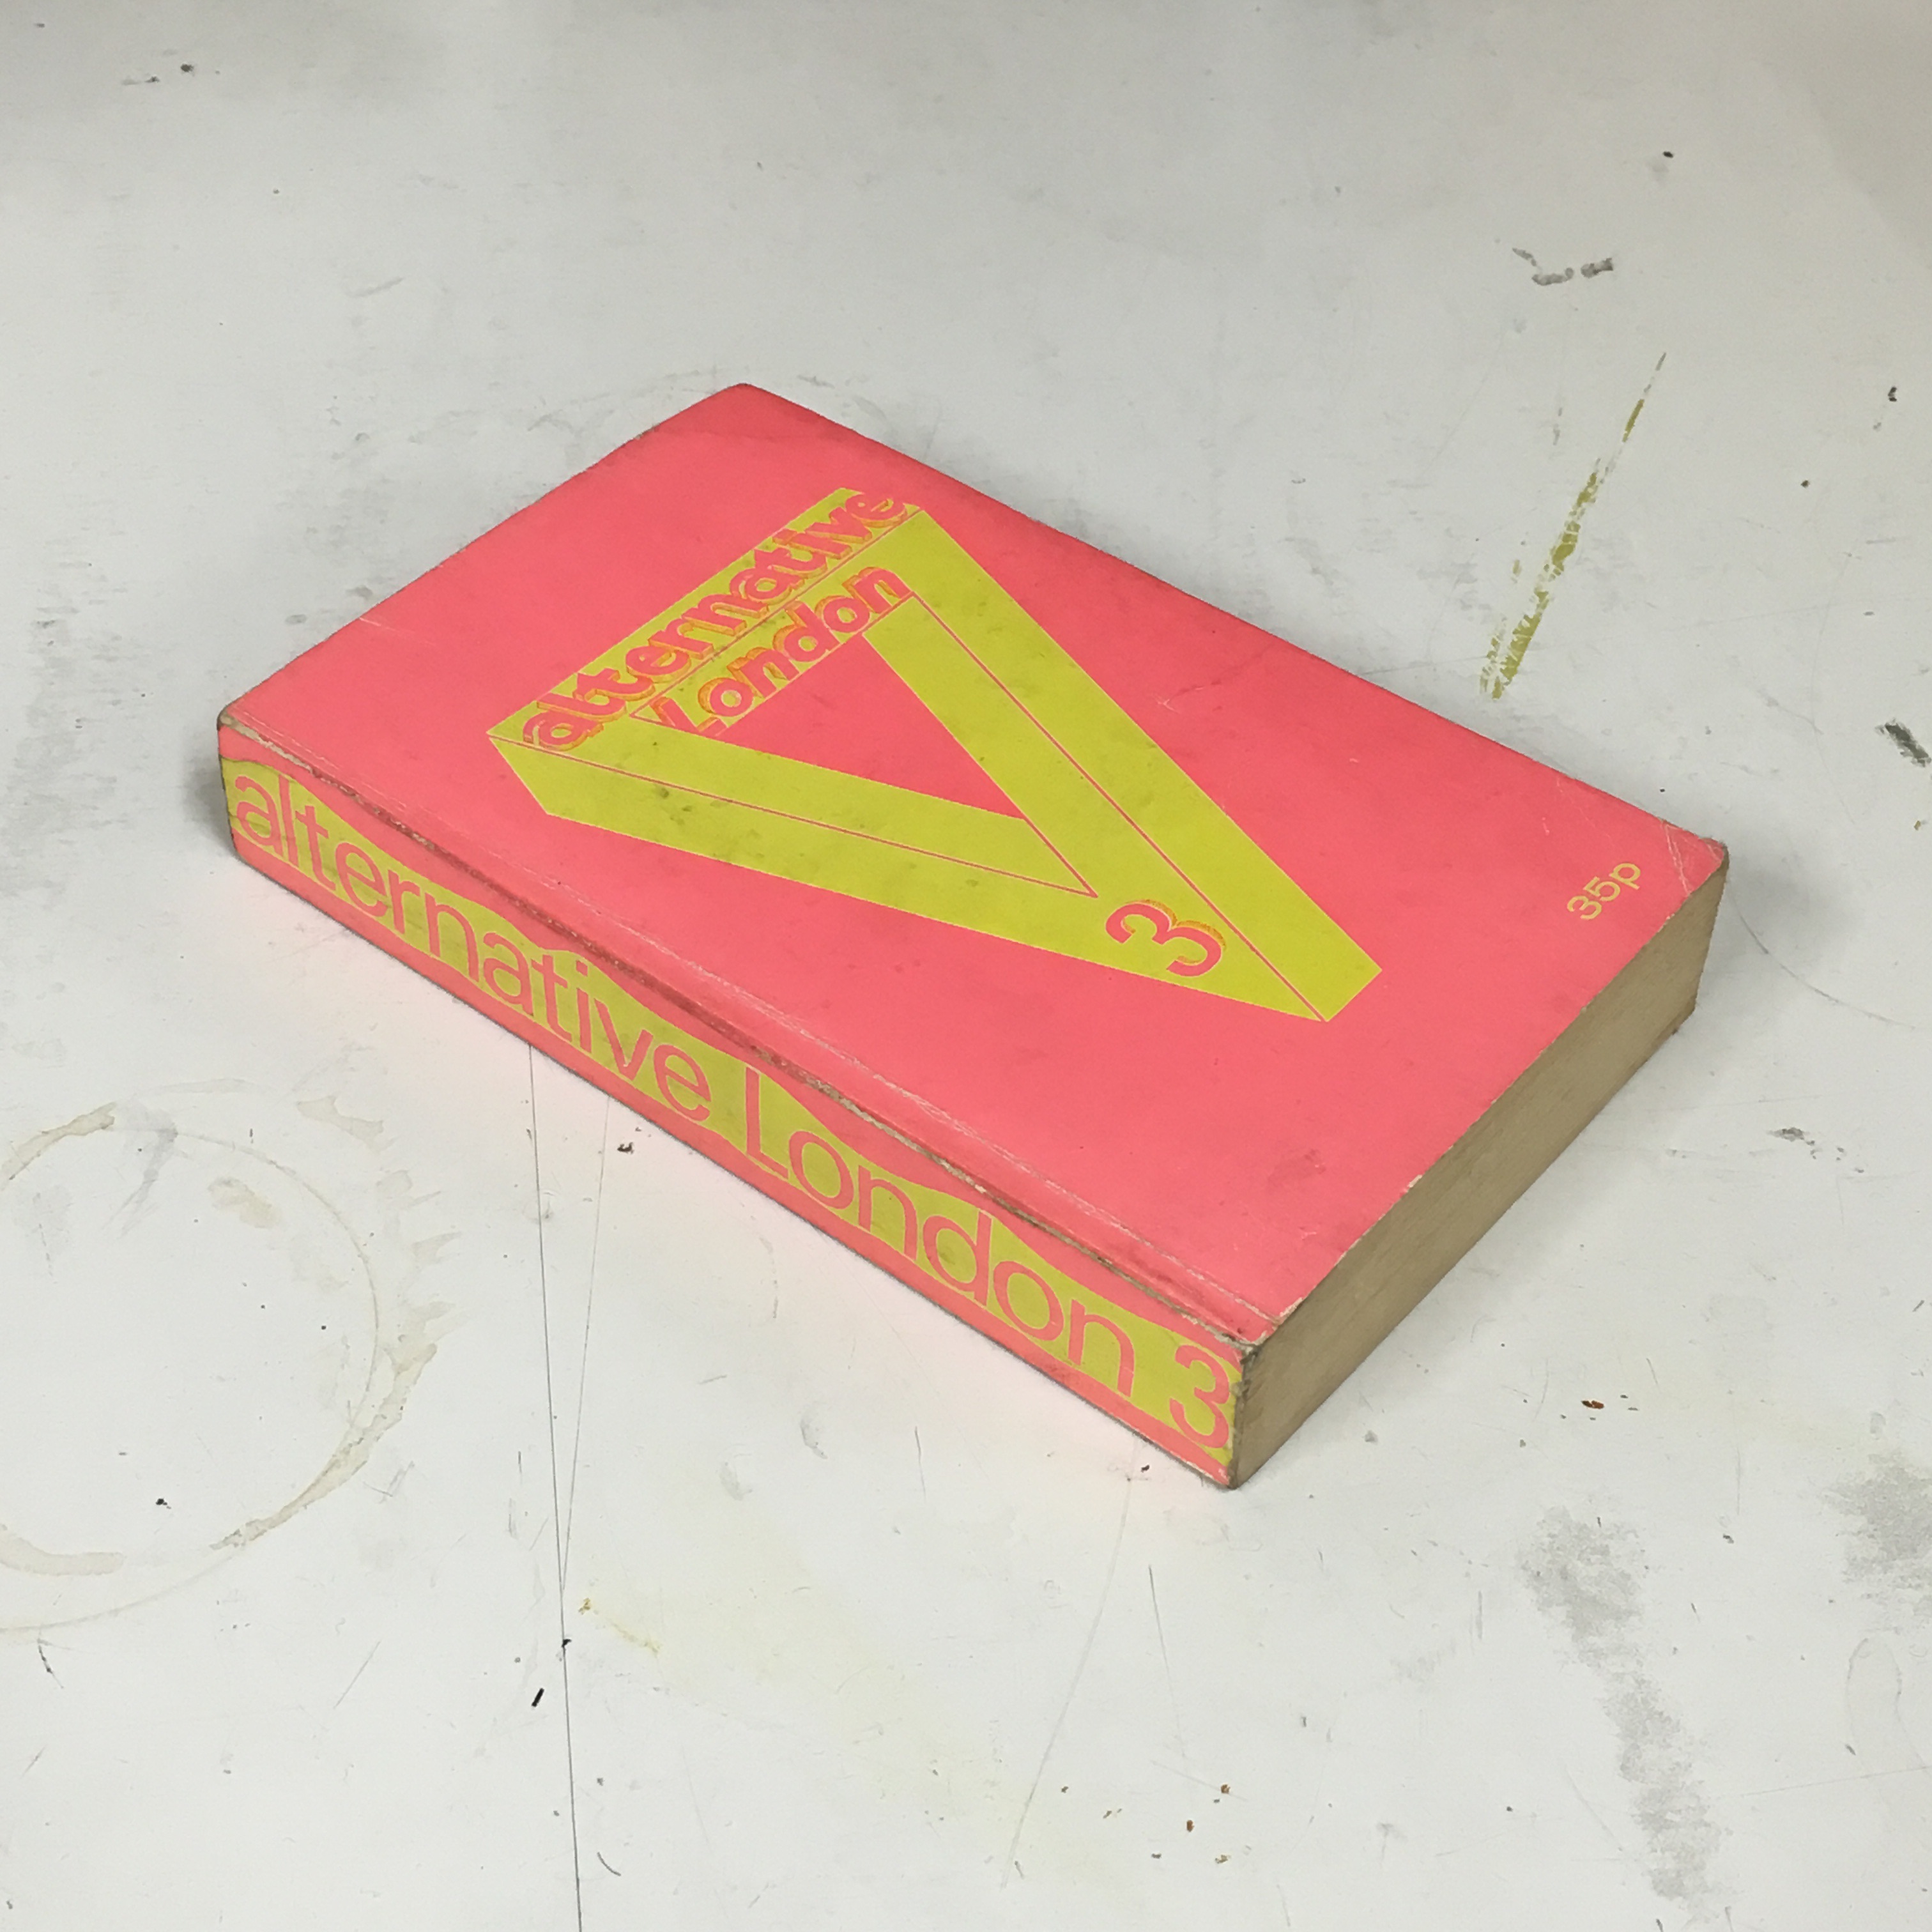 Photo of the third edition of “Alternative London” by Nicholas Saunders, a paperback with a pink and yellow cover